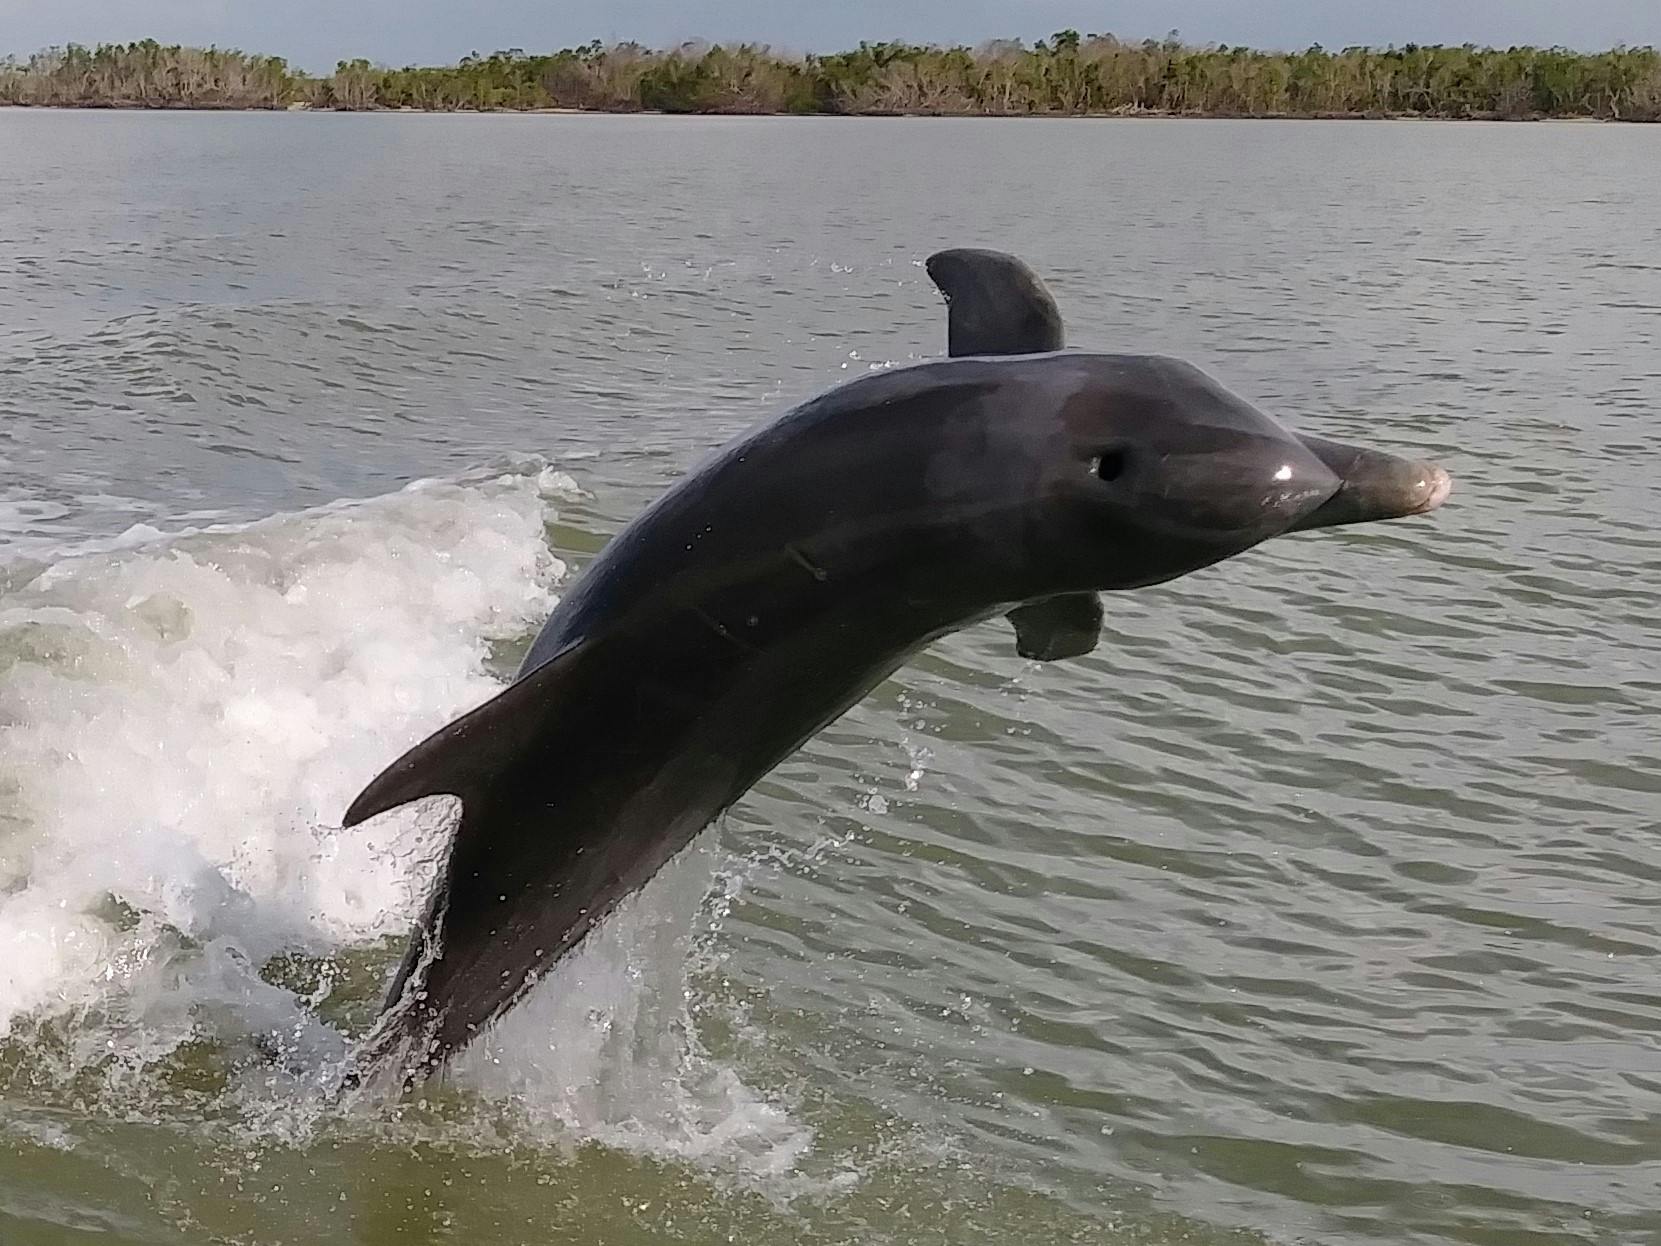 Everglades National Park dolphin, birding and wildlife boat tour